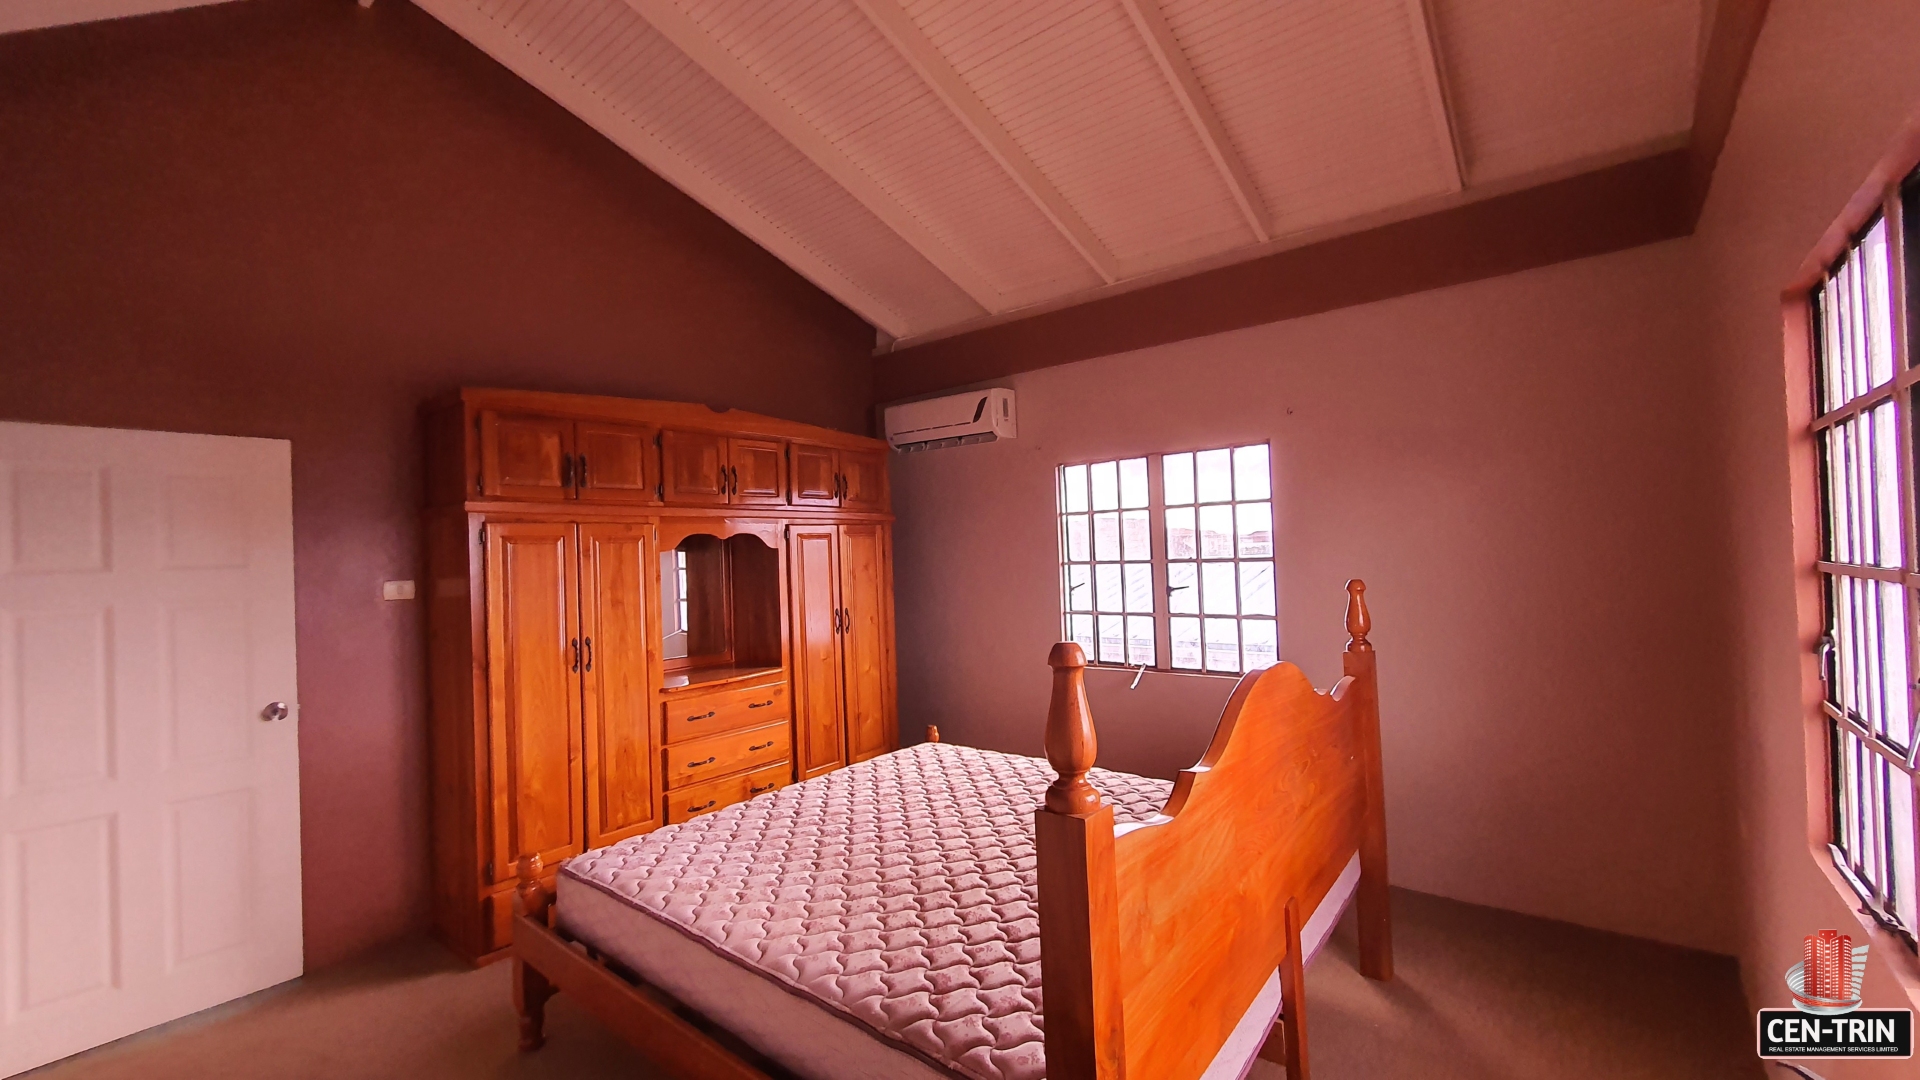 A charming bedroom with a wooden bed frame, wardrobe, and a mirror.